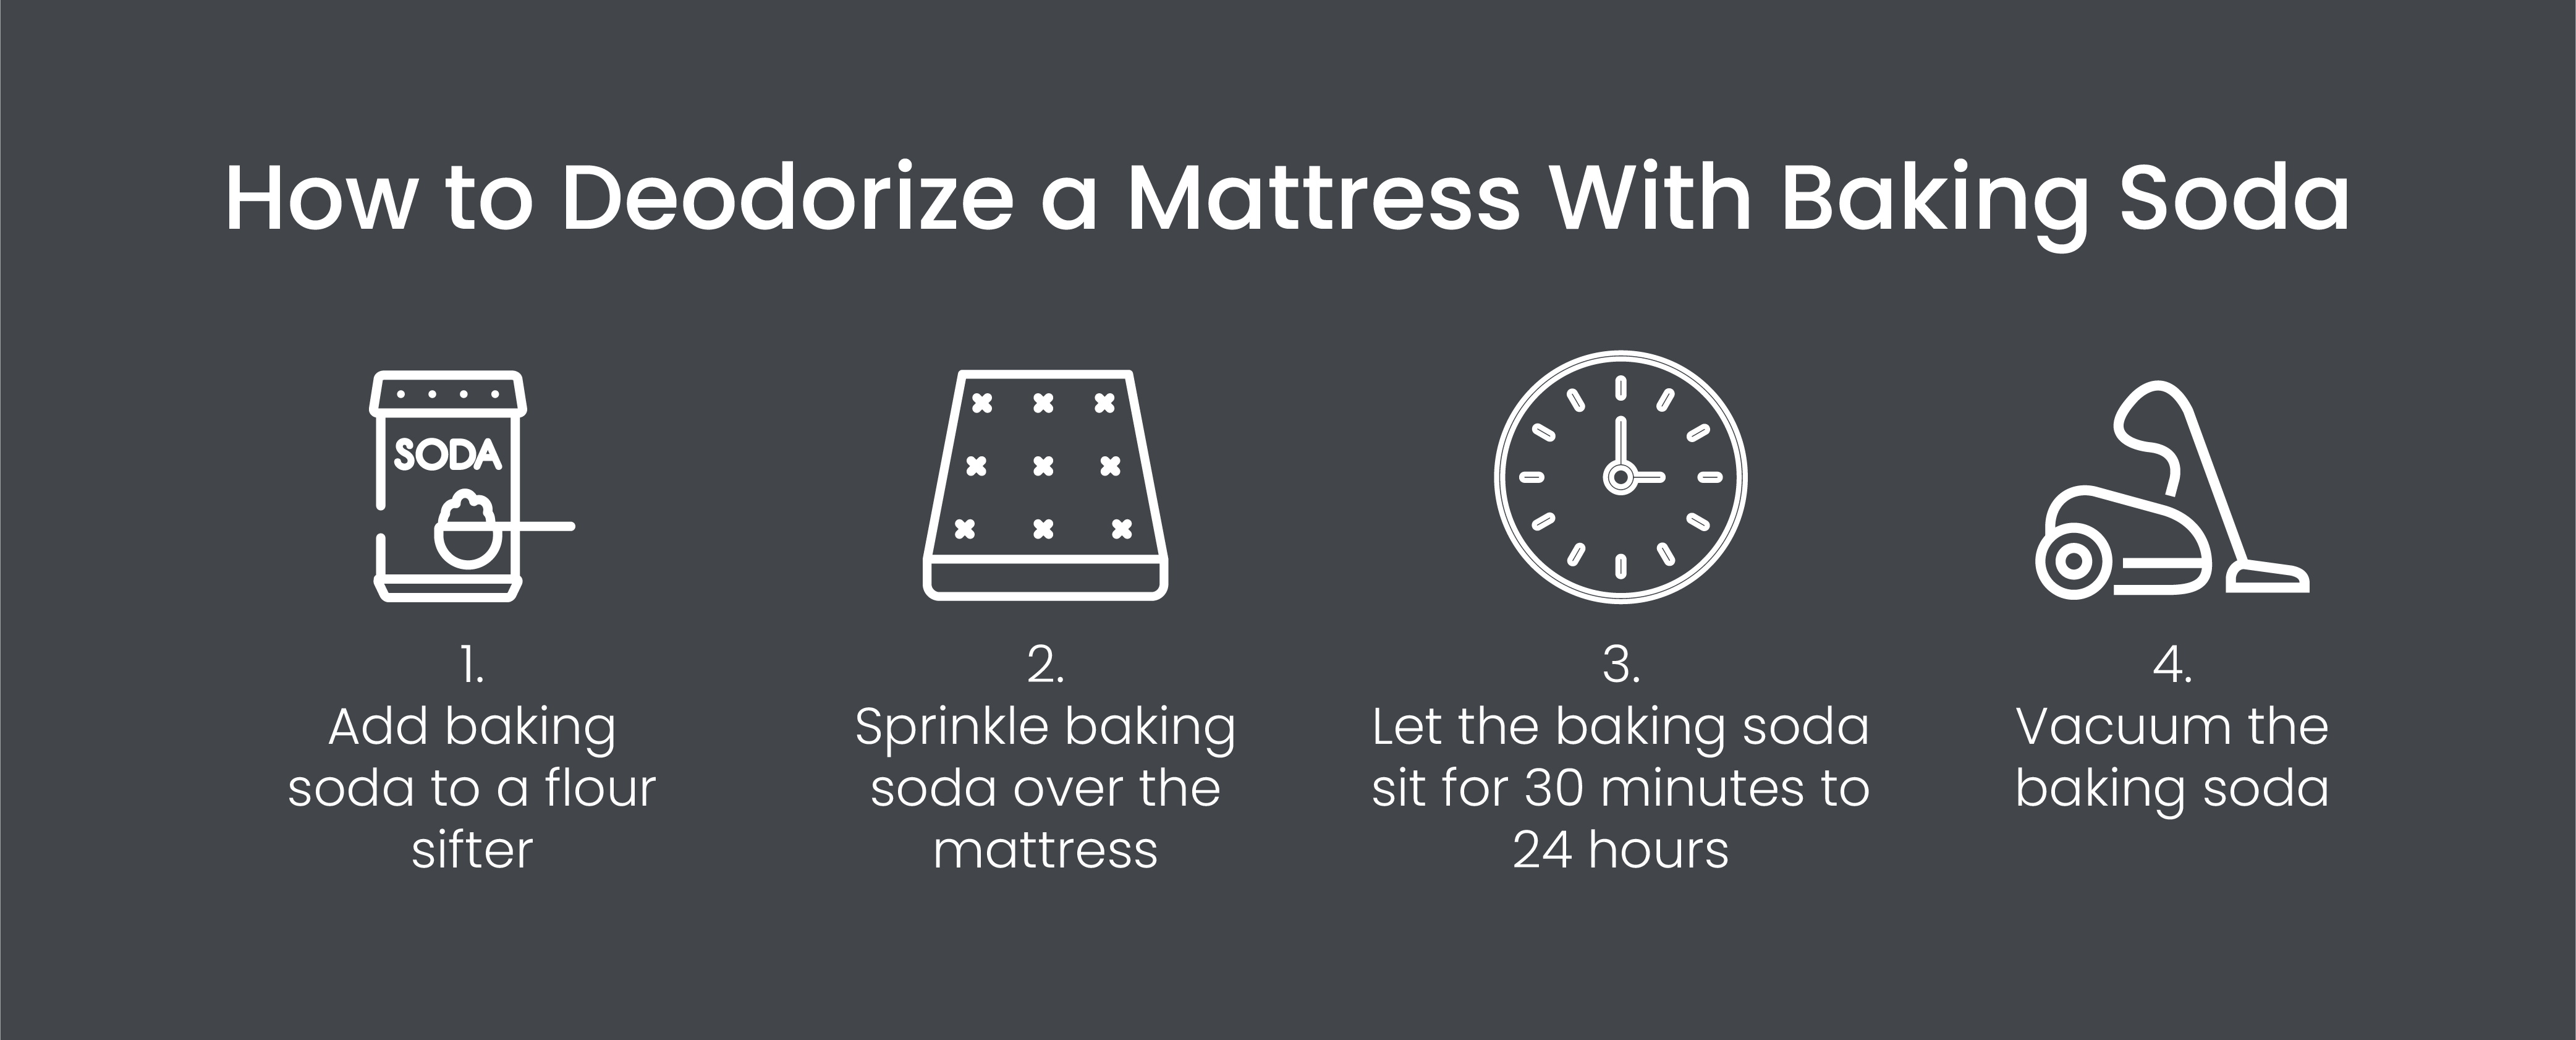 How to deodorize a mattress with baking soda